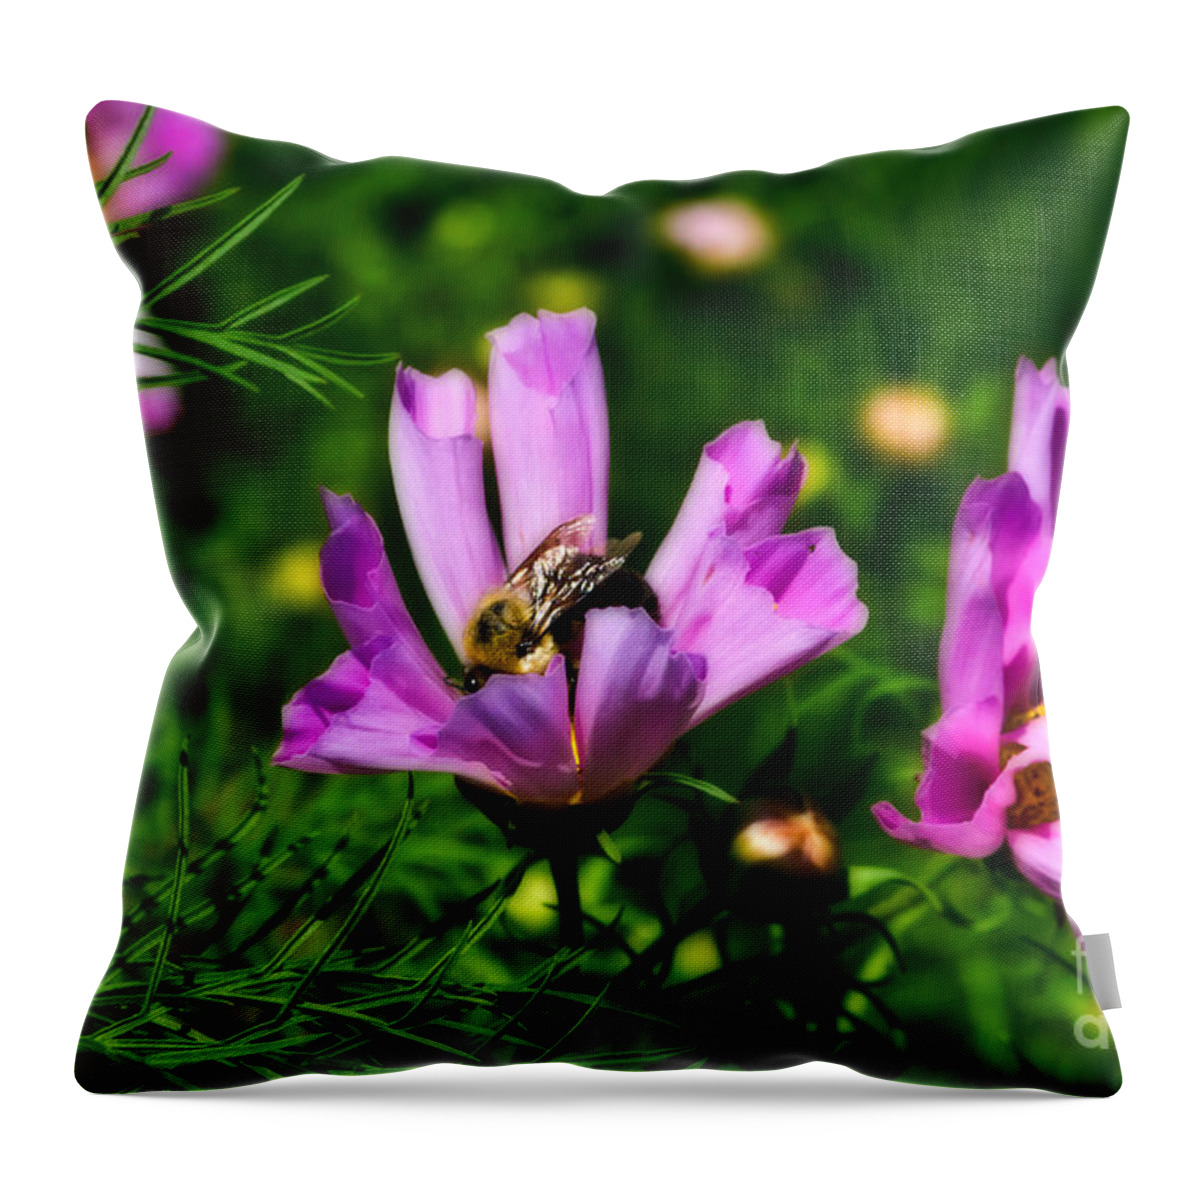 Flower Throw Pillow featuring the photograph Pollinating Flowering by Ms Judi